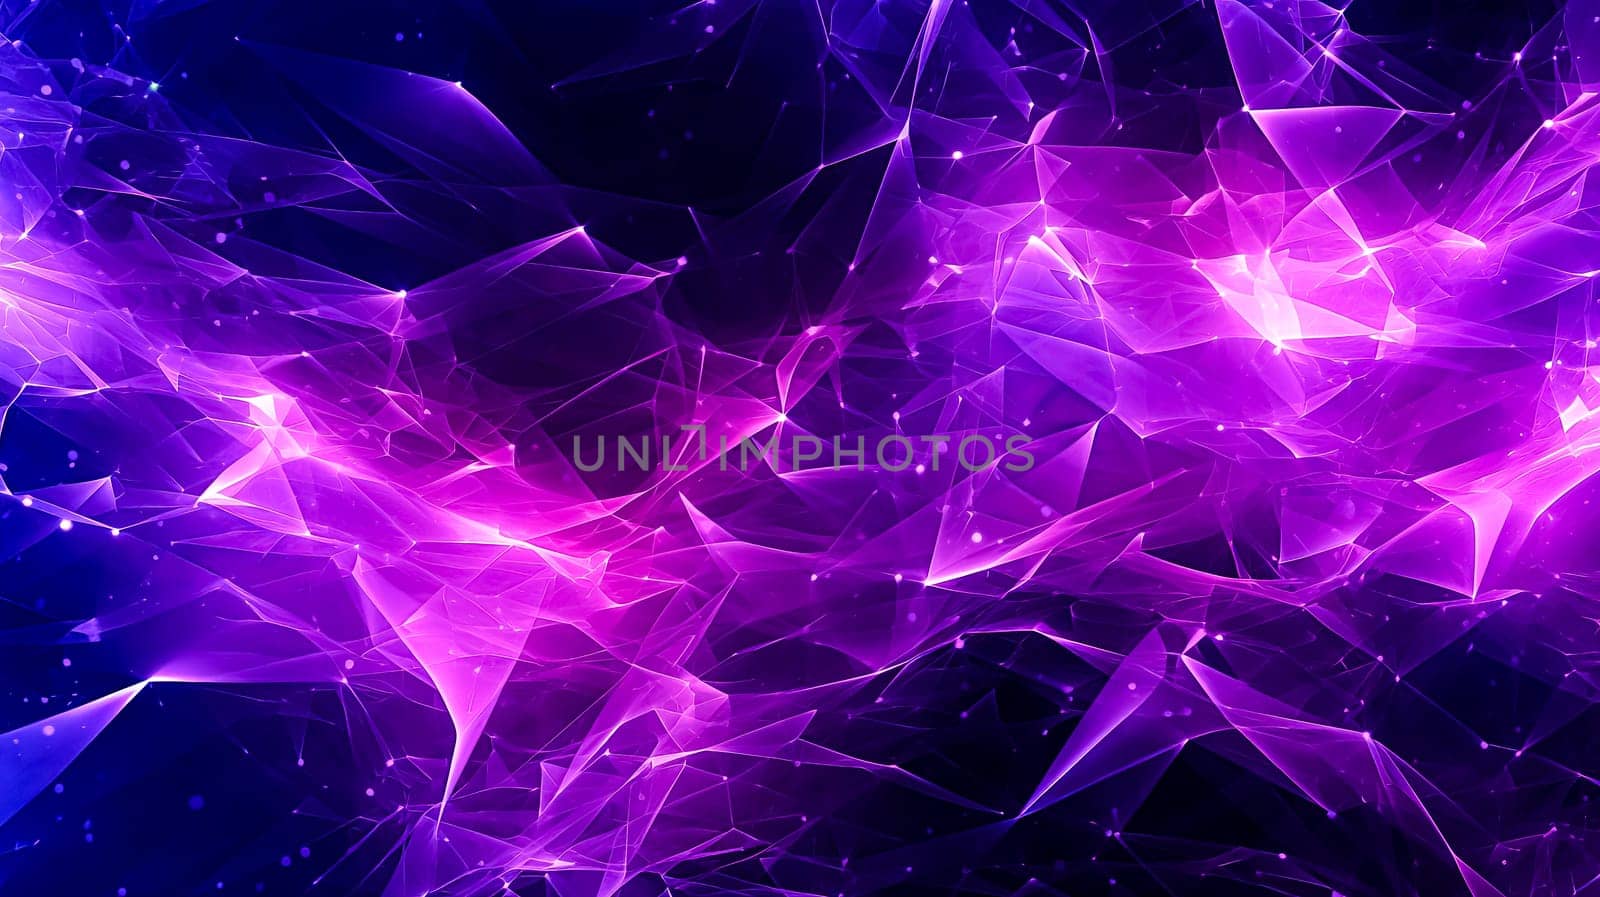 A purple and blue background with a lot of stars and lines by Alla_Morozova93